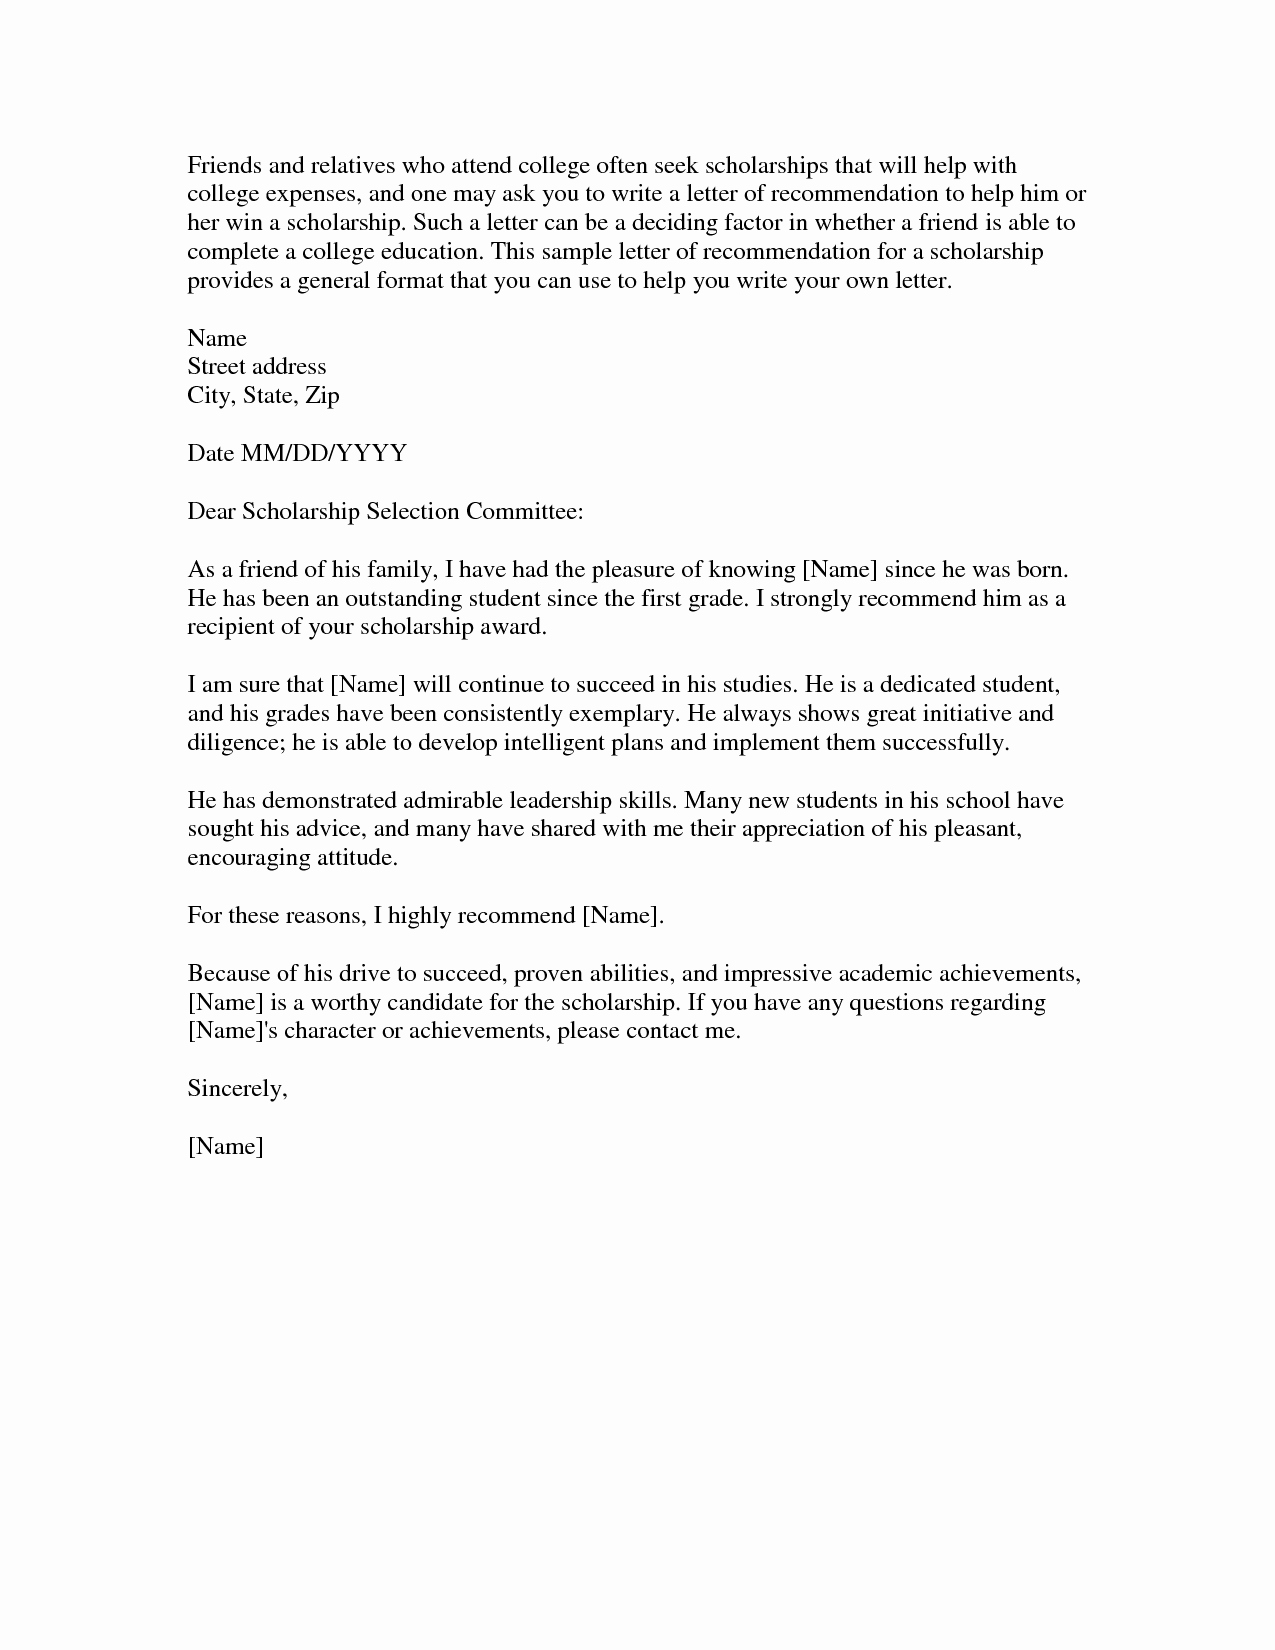 Scholarship Recommendation Letter From Friend Elegant Download Scholarship Re Mendation Letter Sample Word